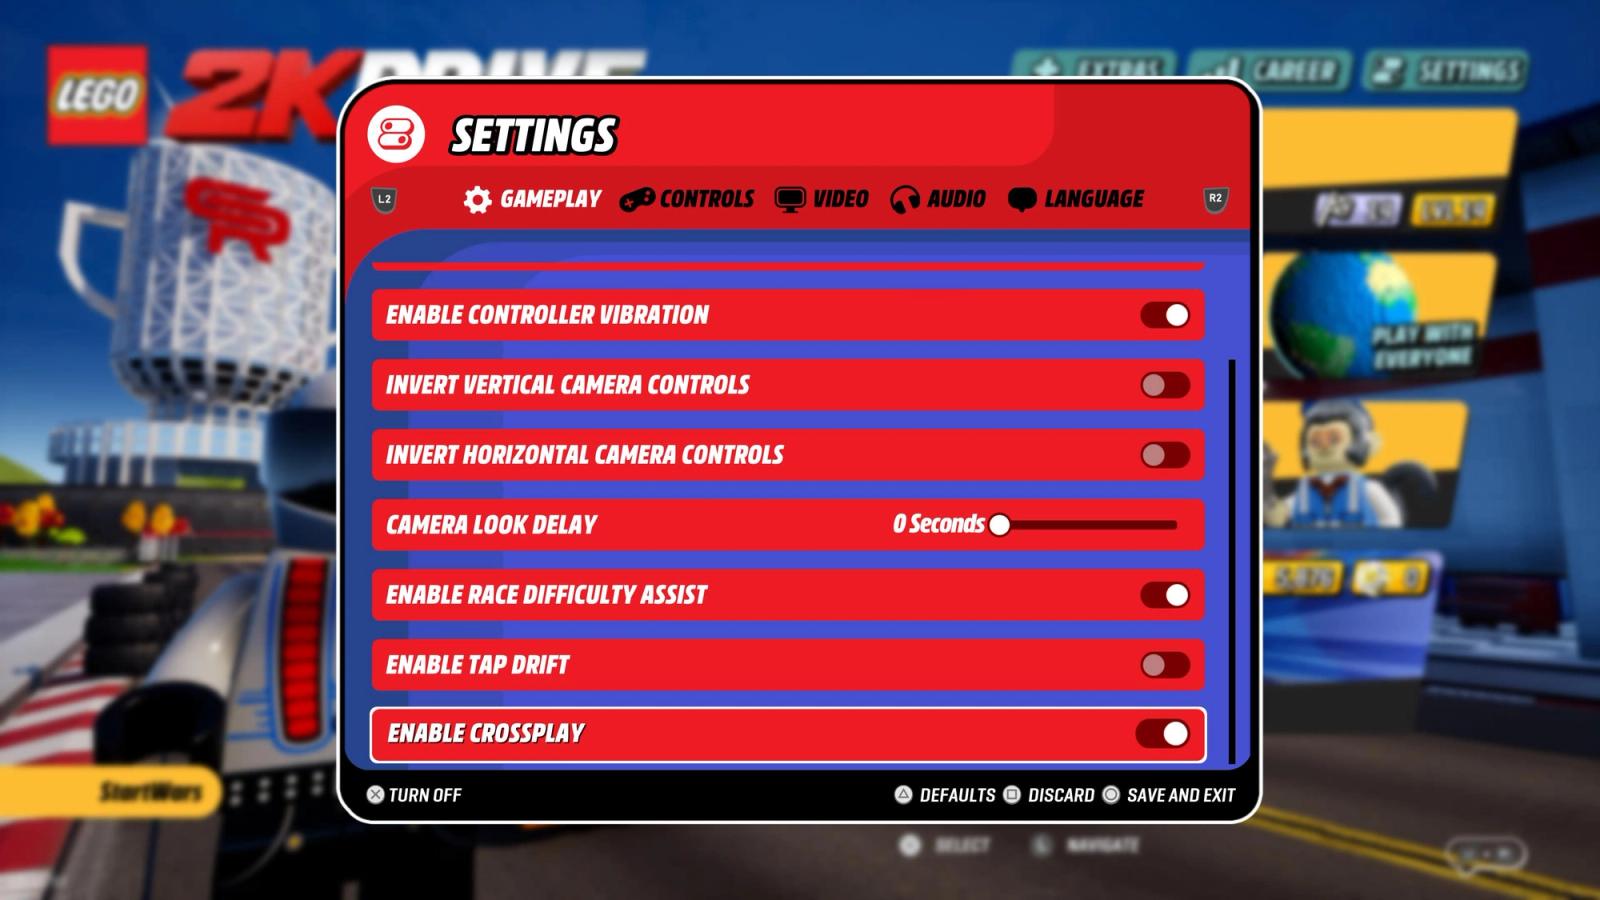 LEGO 2K Drive how to enable crossplay